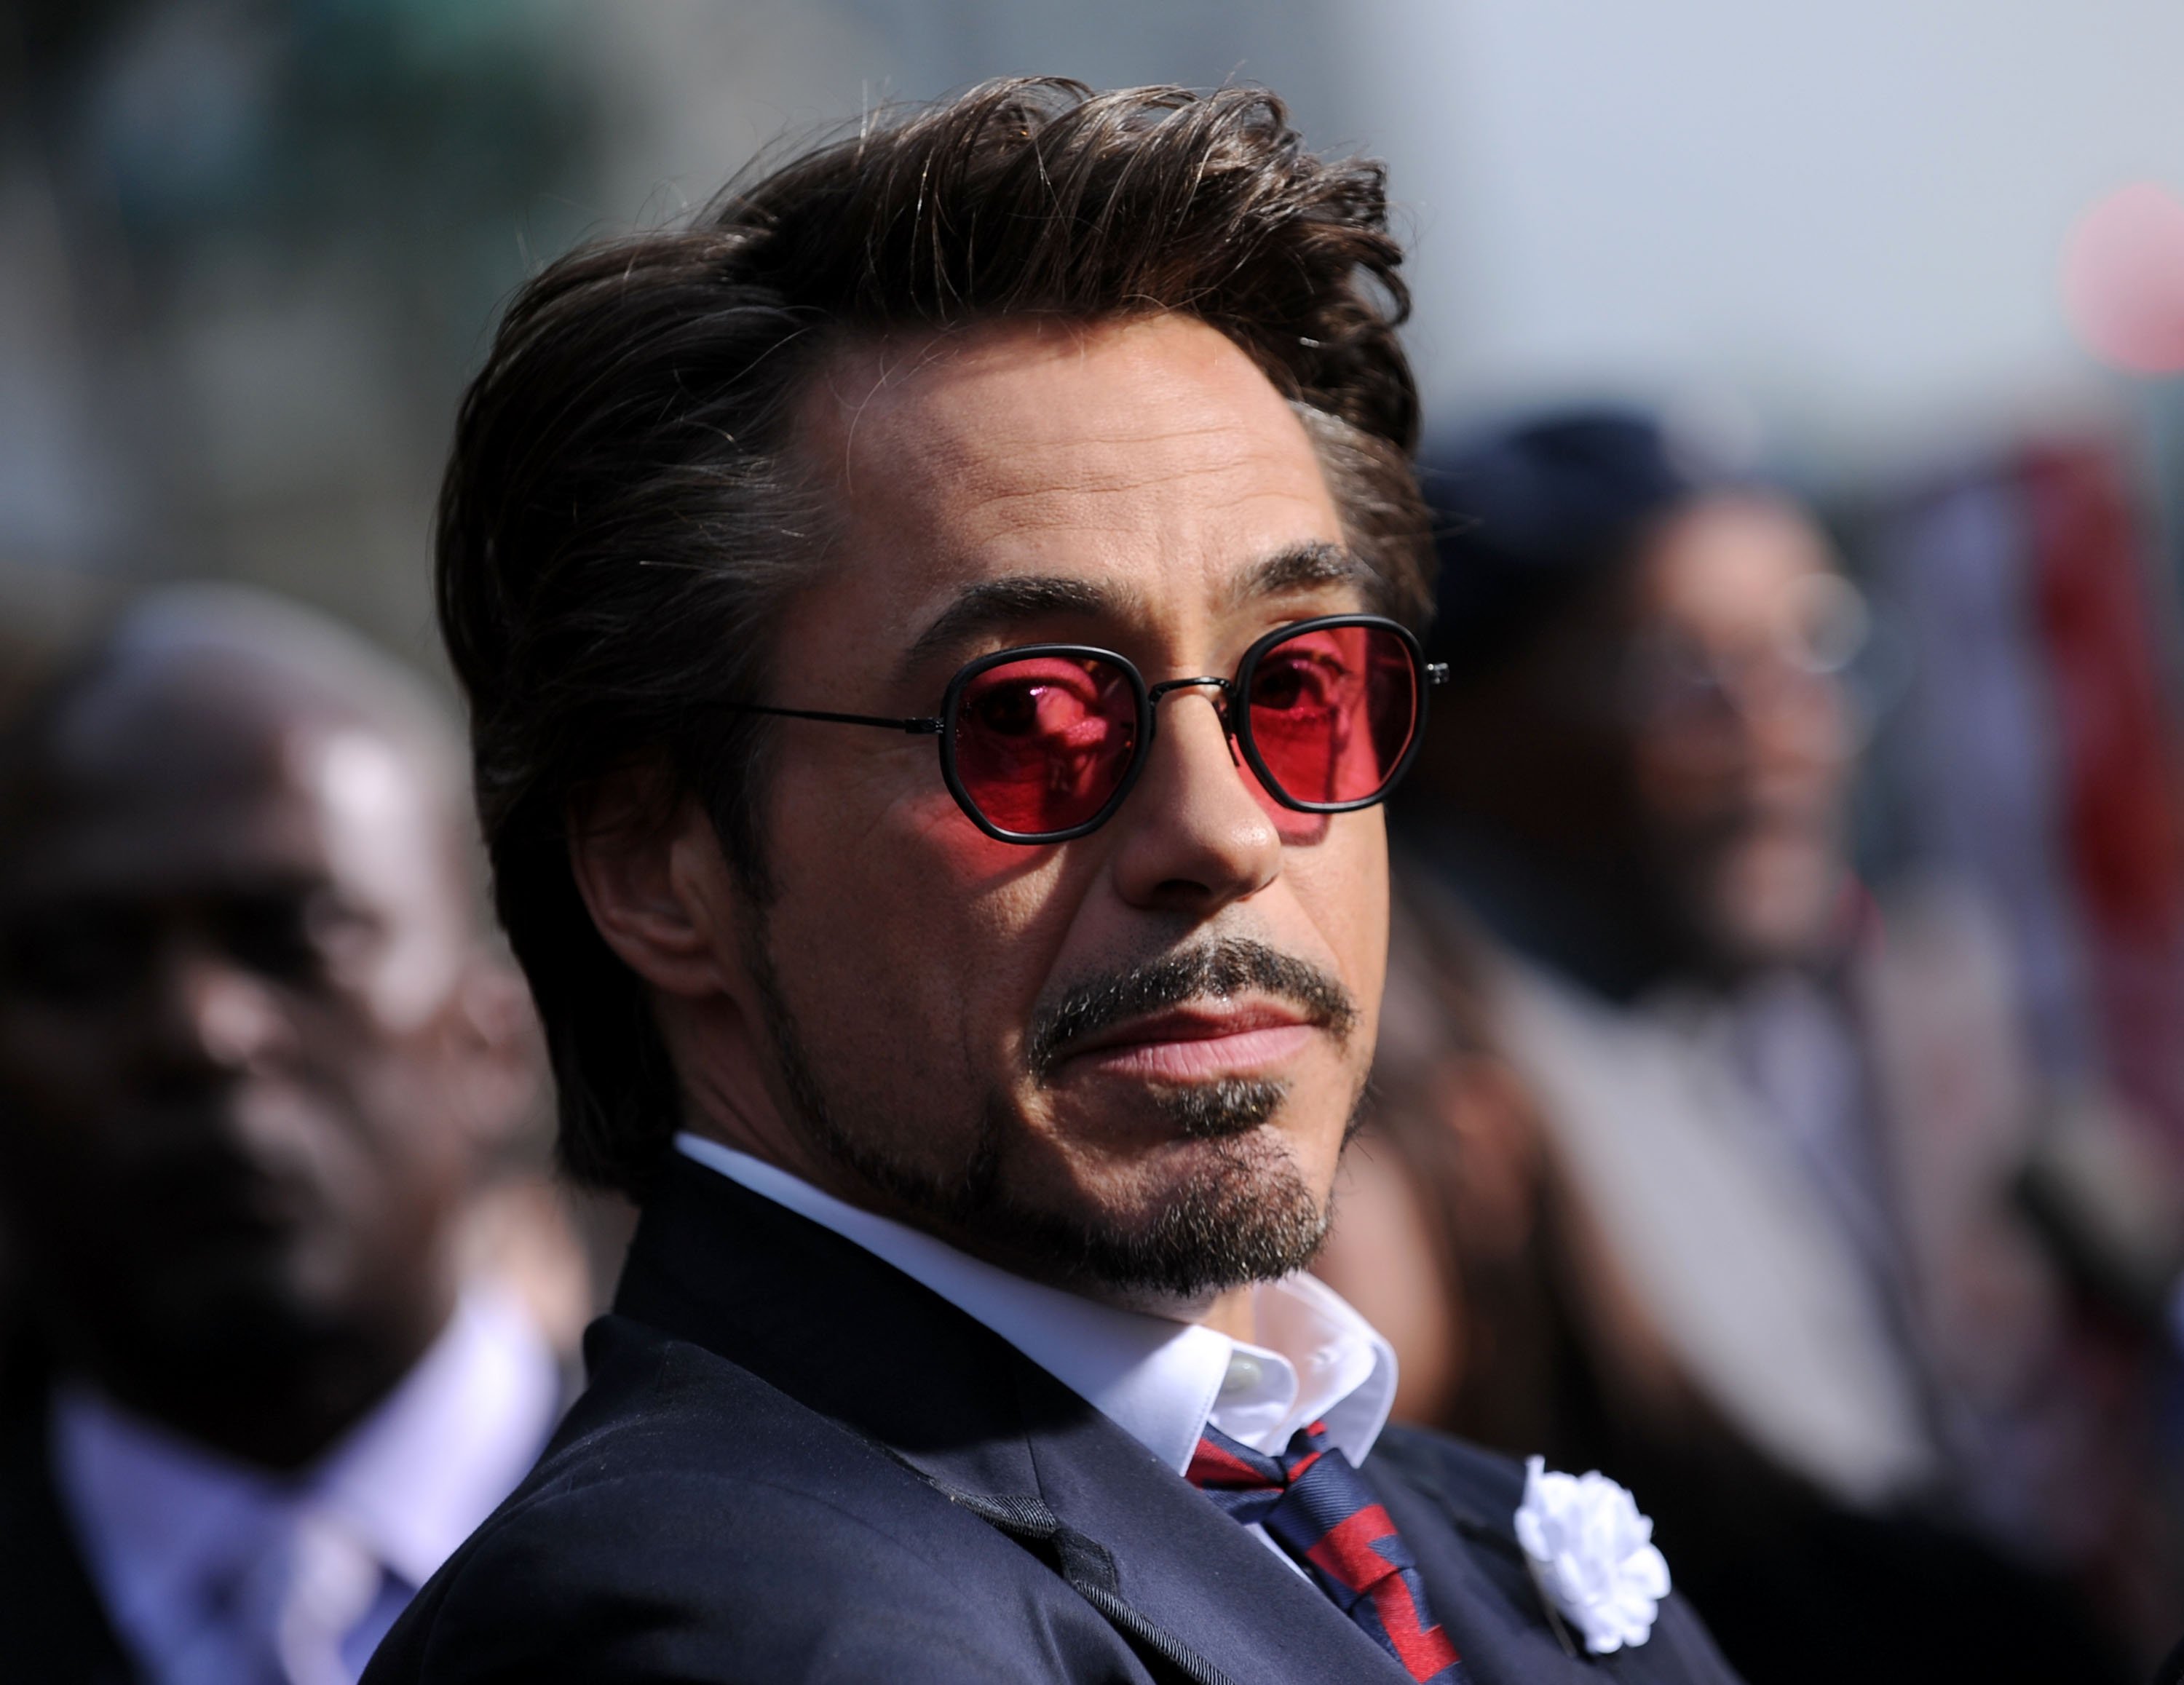 'Spider-Man: Homecoming' star Robert Downey Jr., who plays Iron Man, wears red-tinted glasses, a dark blue suit, and a red and blue tie.